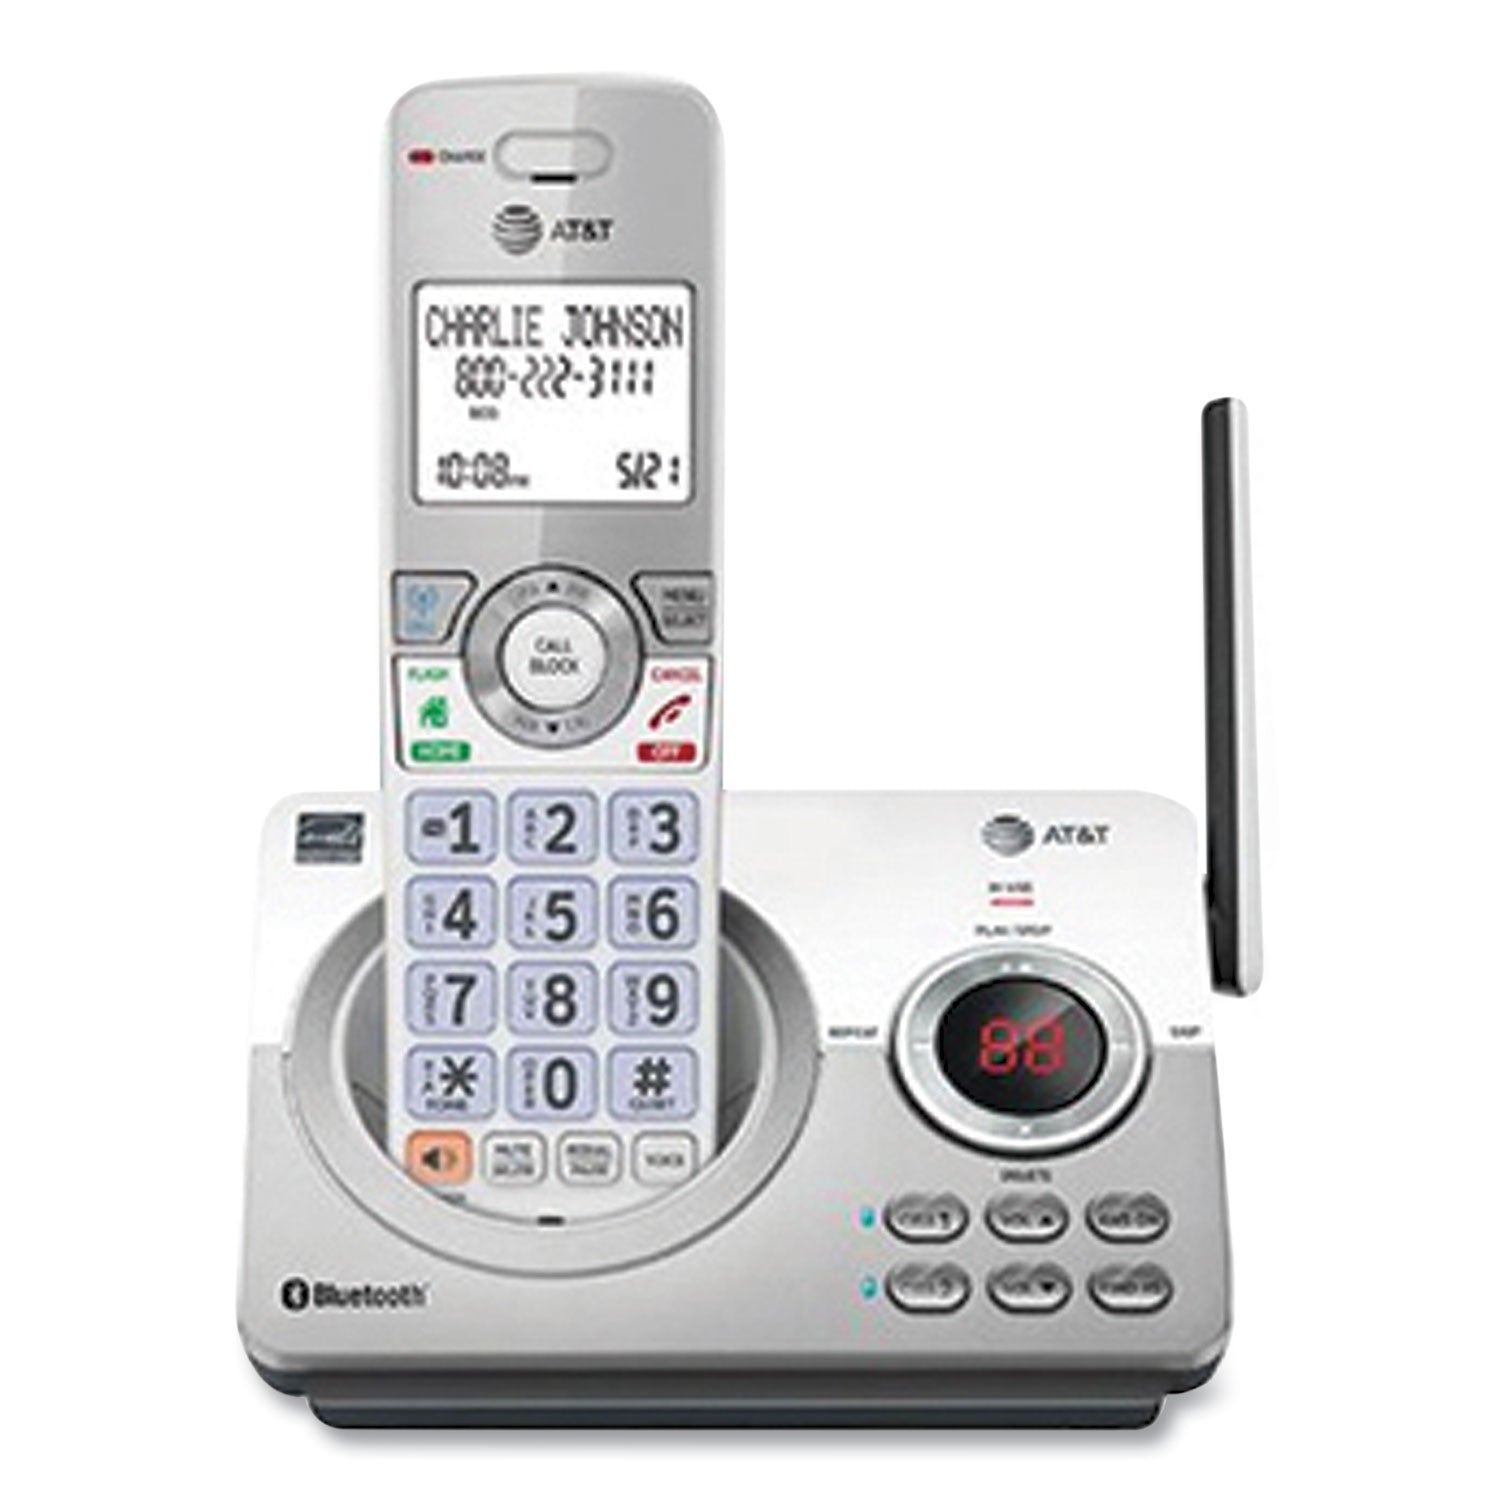 connect-to-cell-dl72310-cordless-telephone-base-and-2-additional-handsets-white-silver_attdl72310 - 3